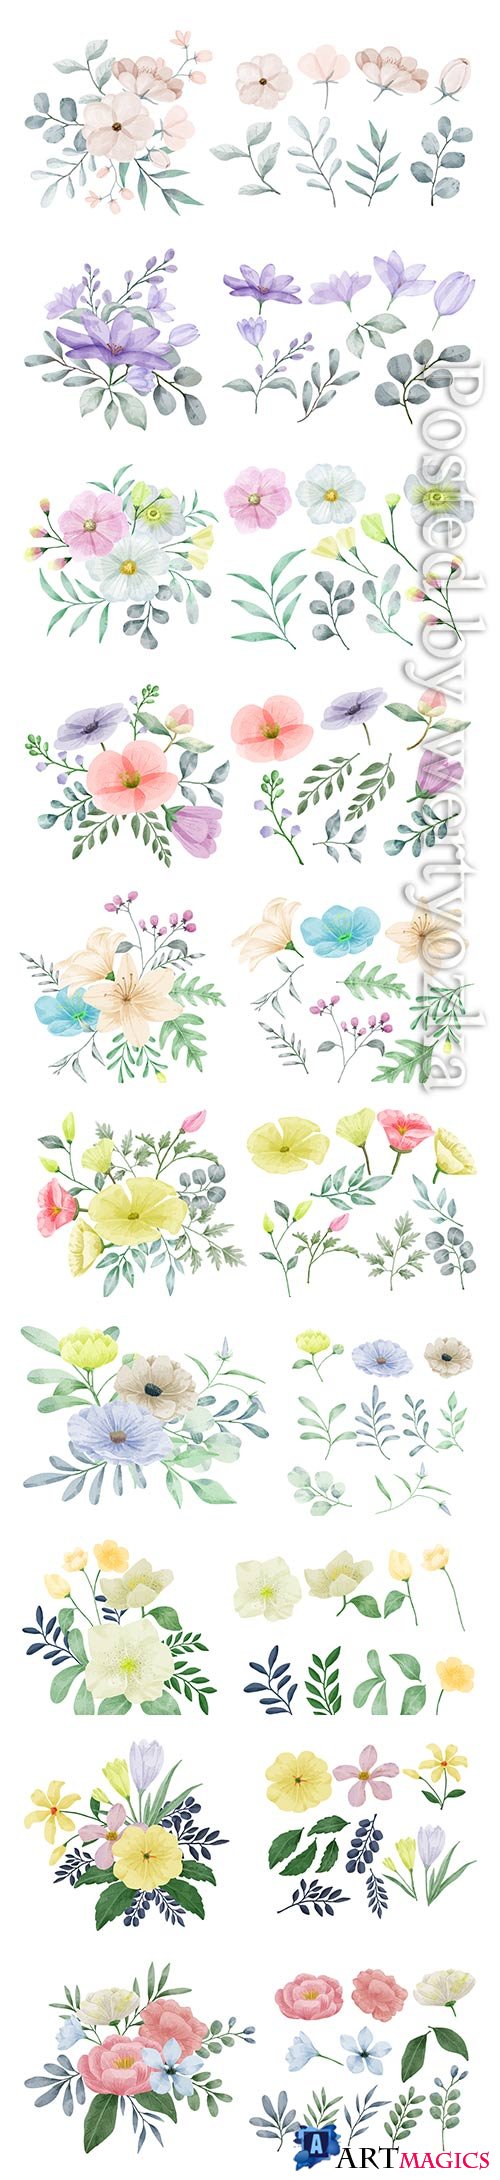 Vector flowers painted with watercolors